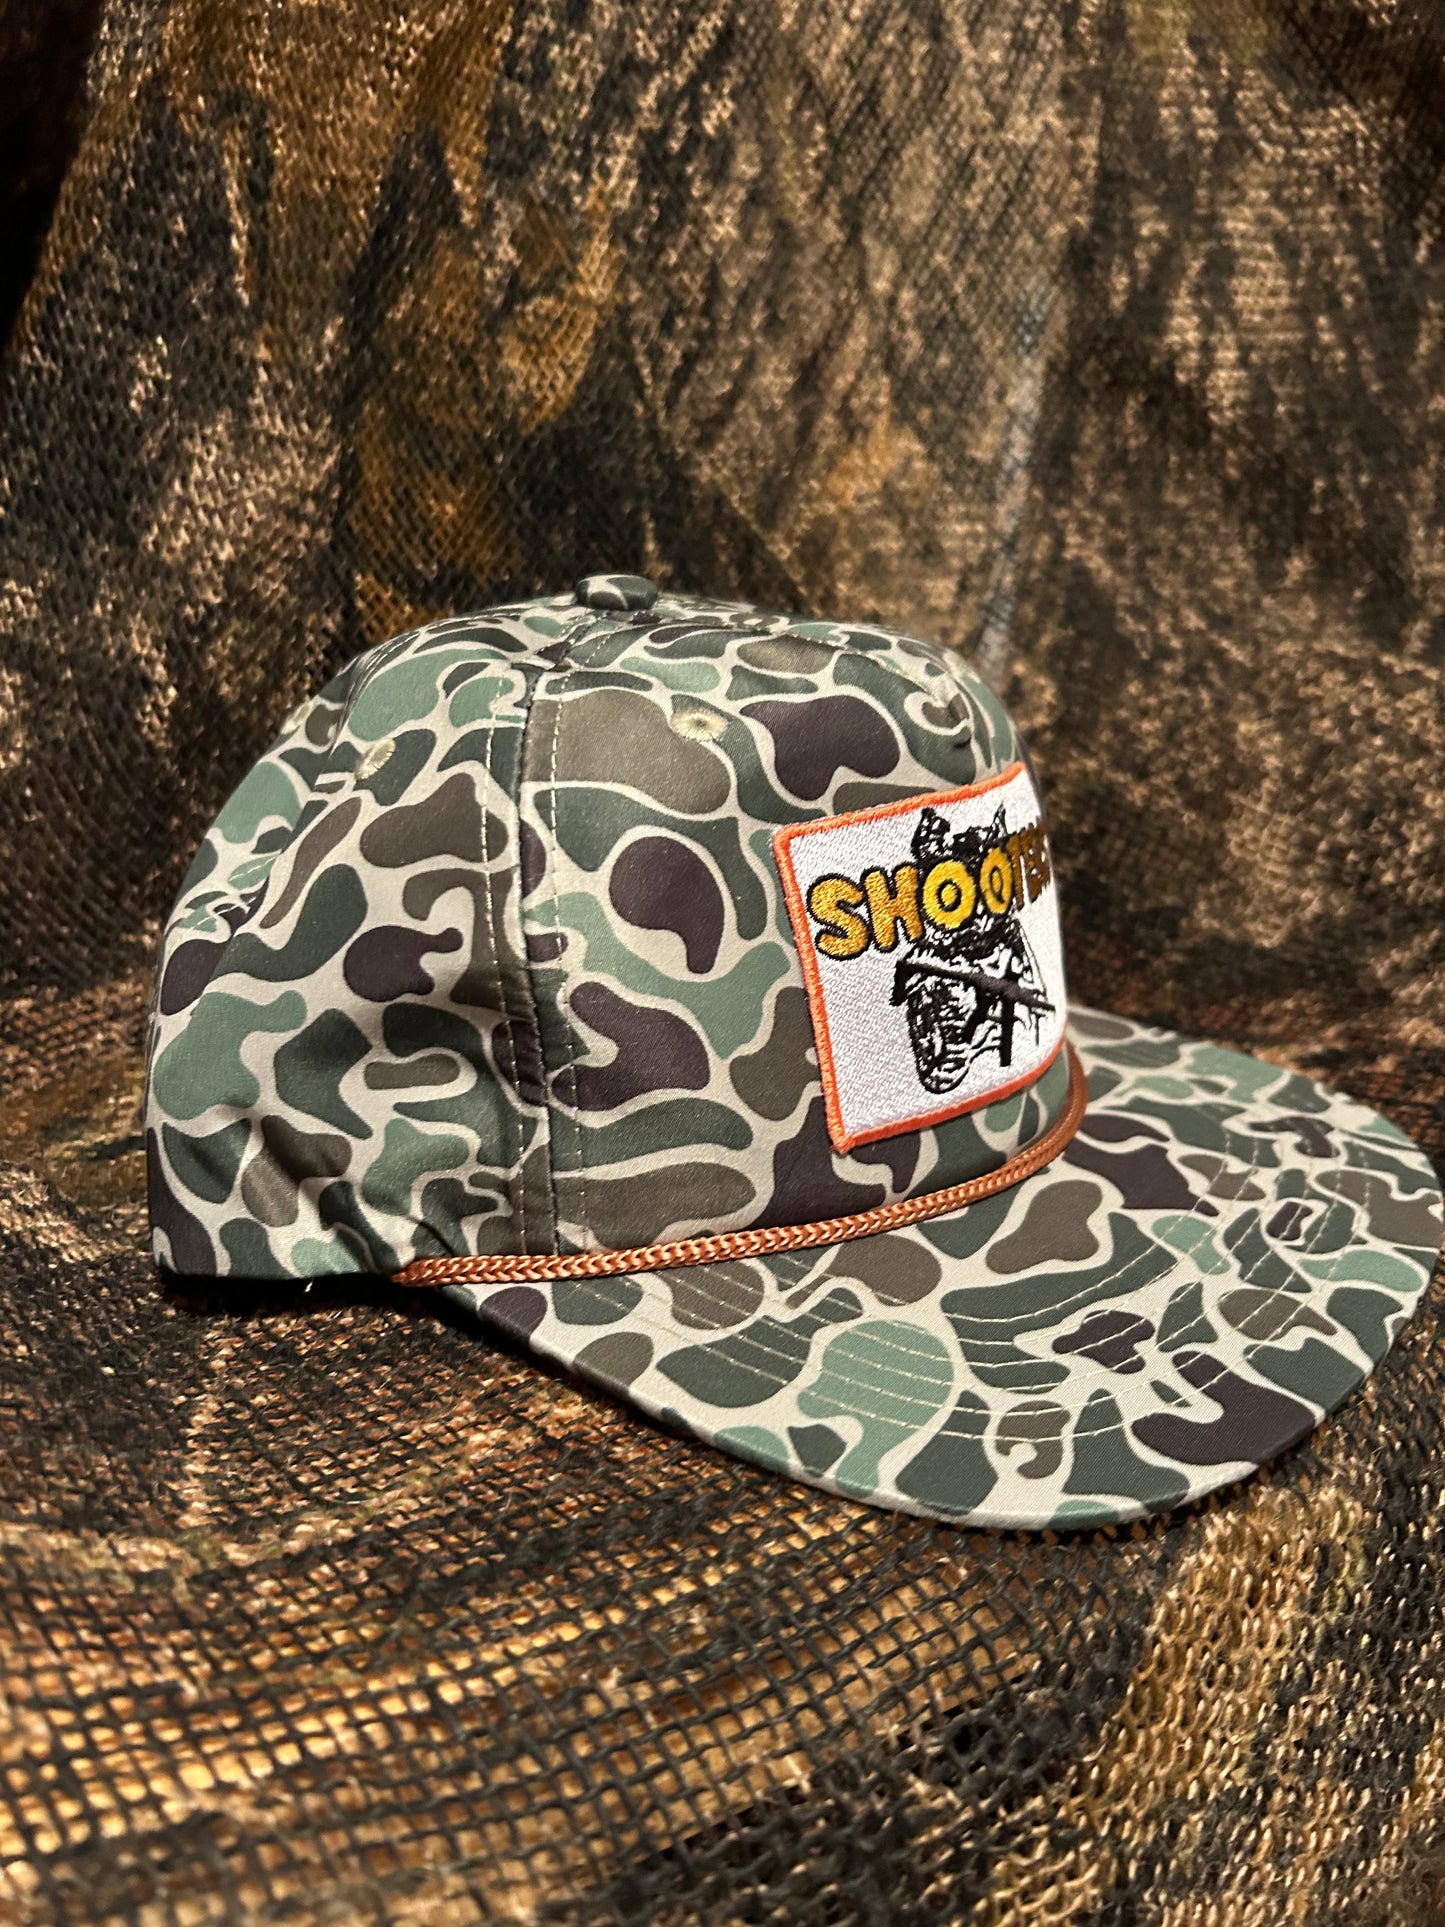 Shooters patch on a Camo SnapBack hat